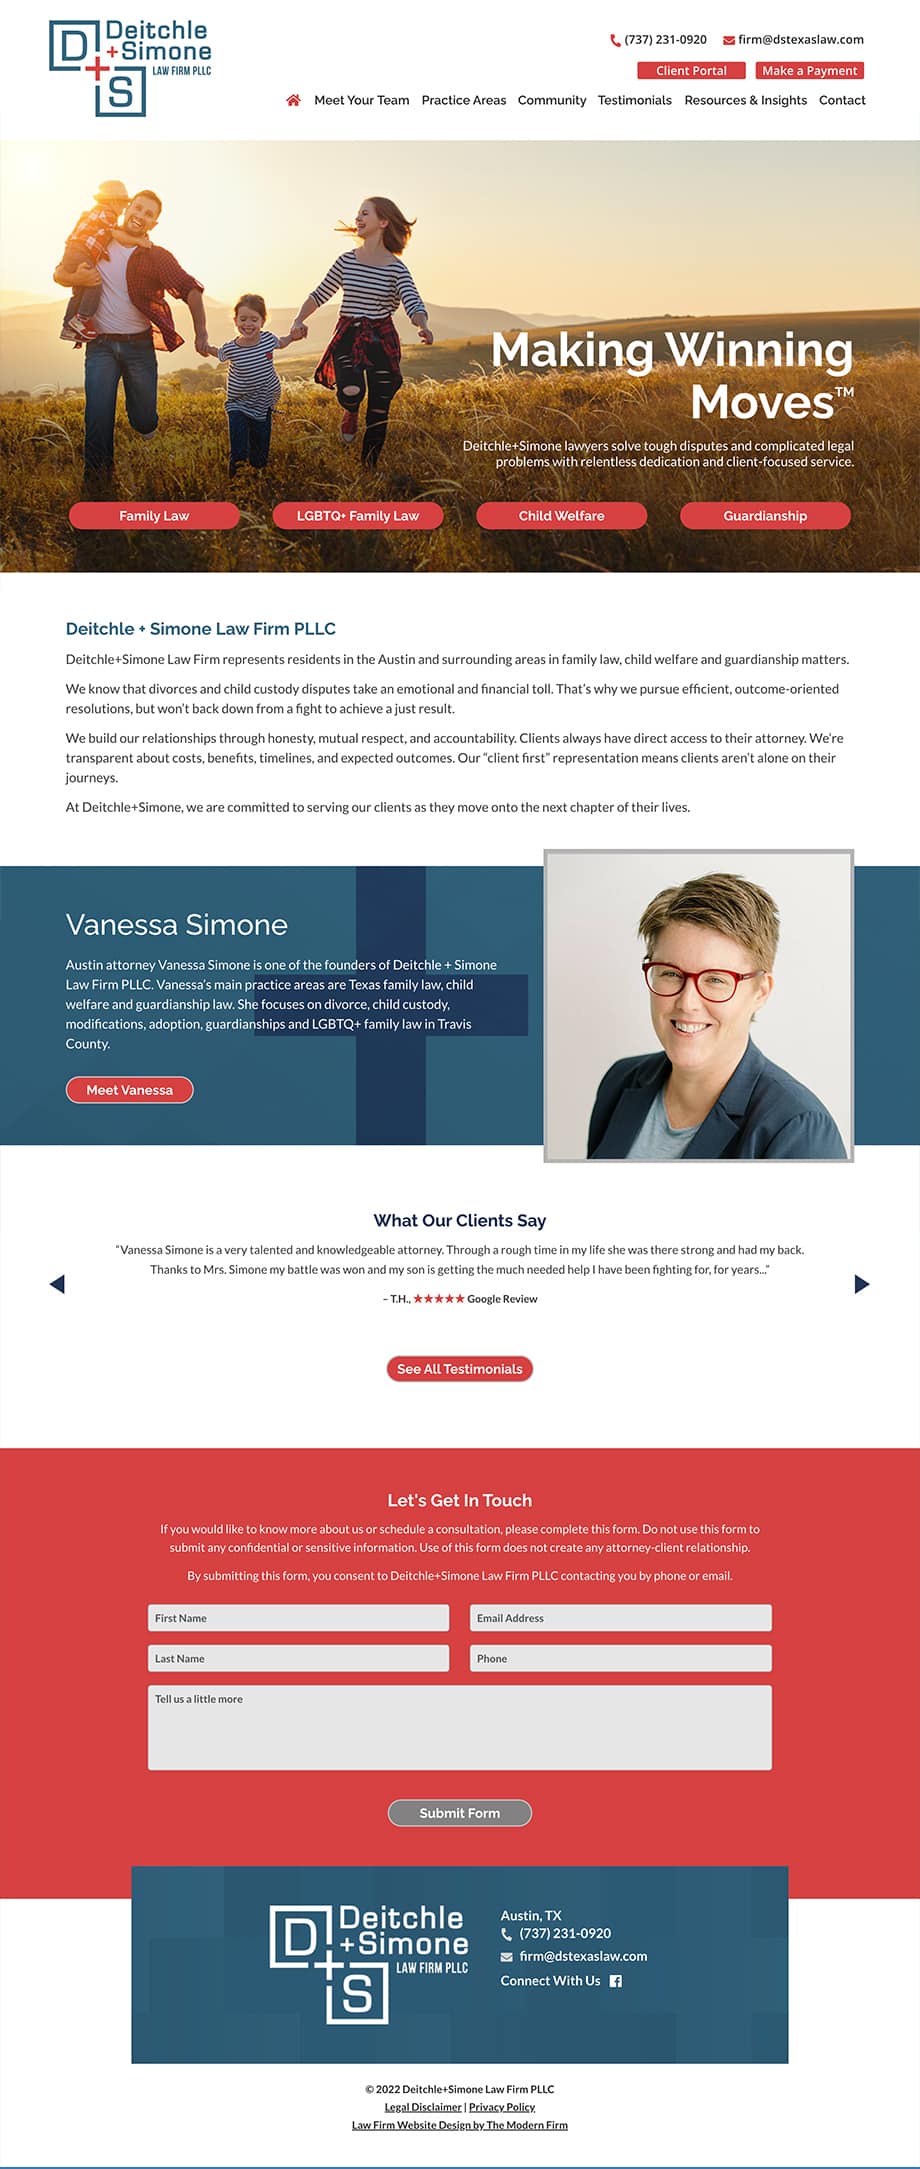 Law Firm Website Design for Deitchle+Simone Law Firm PLLC